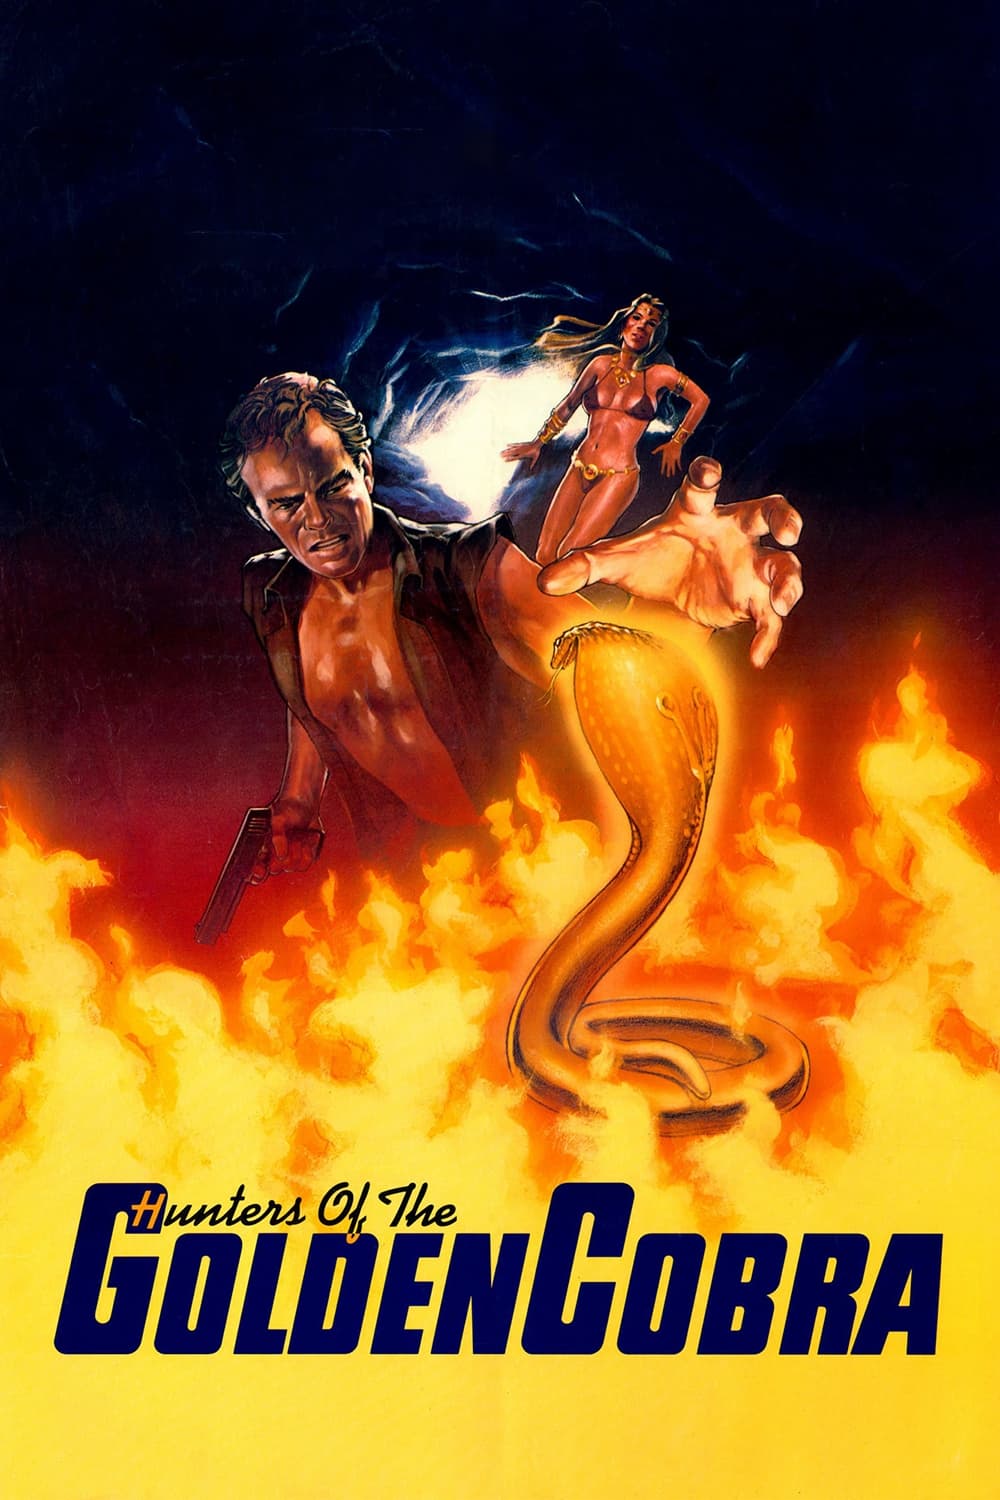 The Hunters of the Golden Cobra (1982)